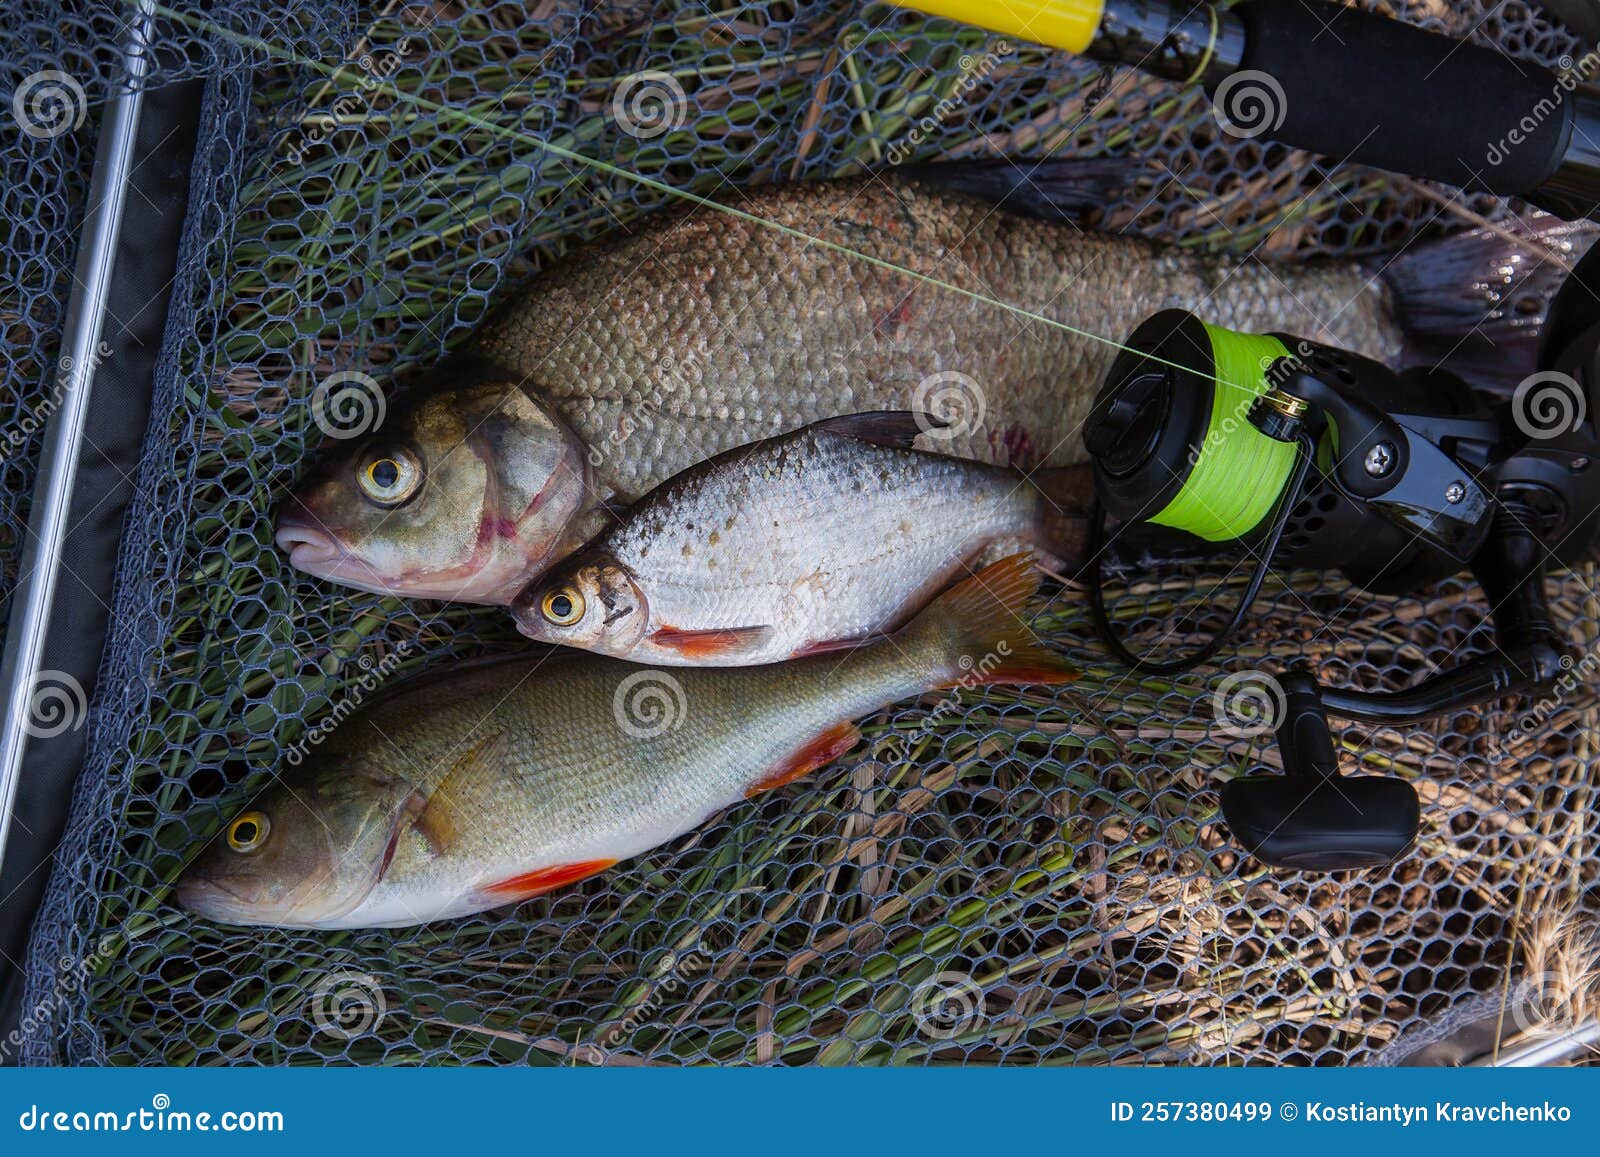 https://thumbs.dreamstime.com/z/assort-kinds-fish-freshwater-common-bream-perch-european-white-silver-fishing-rod-catching-known-as-bronze-carp-257380499.jpg